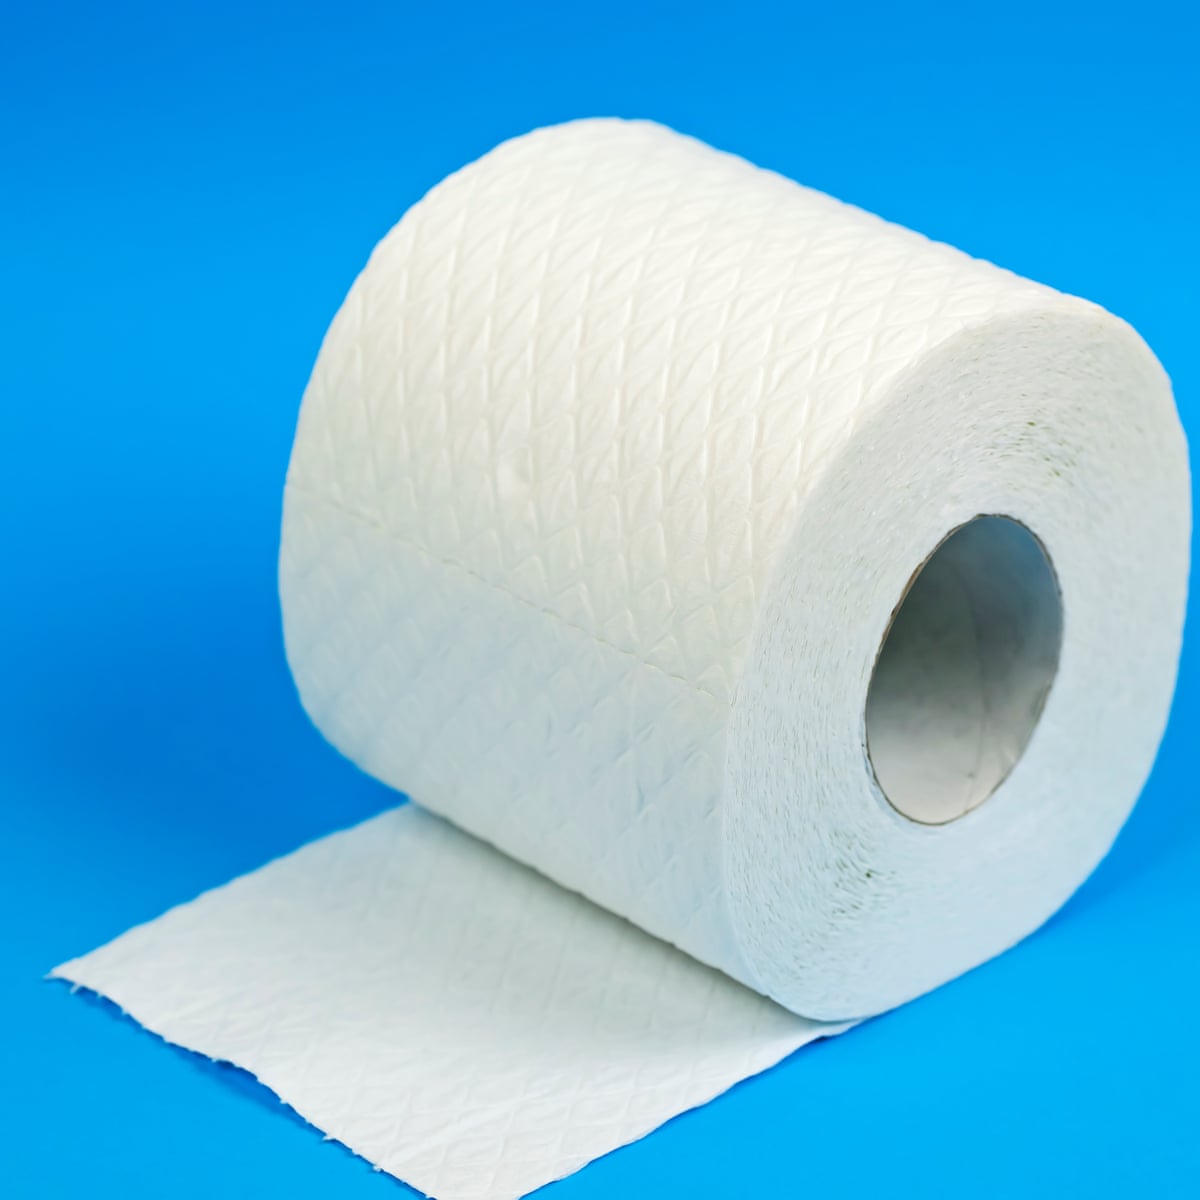 Caught short: lack of recycled toilet paper in UK 'fuelling deforestation', Trees and forests